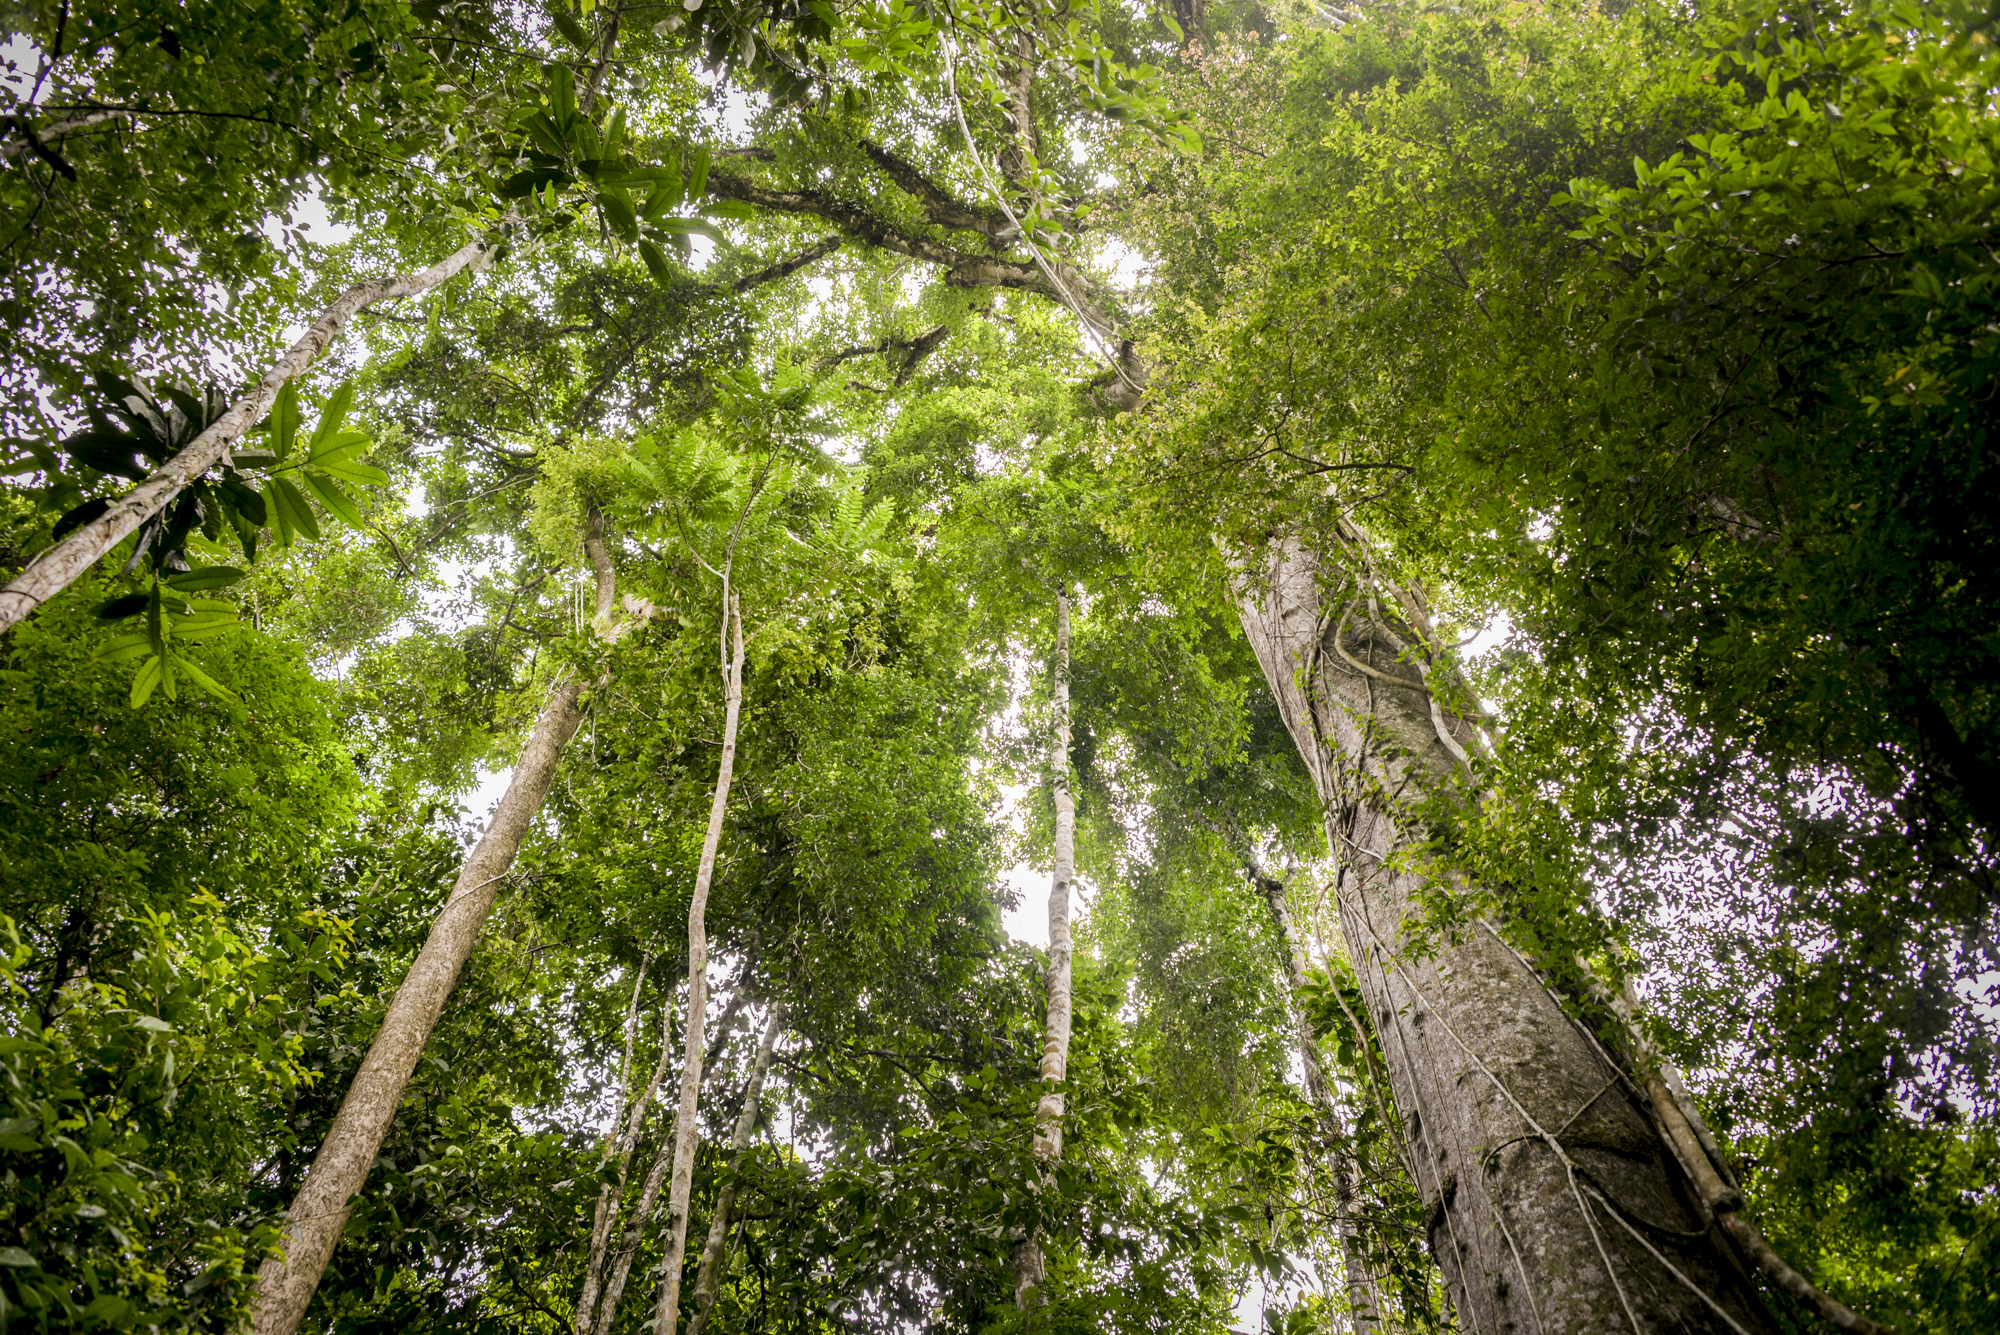 Image of rainforest trees taken at the angel of looking into the trees from the forest floor. Bright green leaves can fill the canopy and are supported by many tall tree trunks, some slim and others thick. 